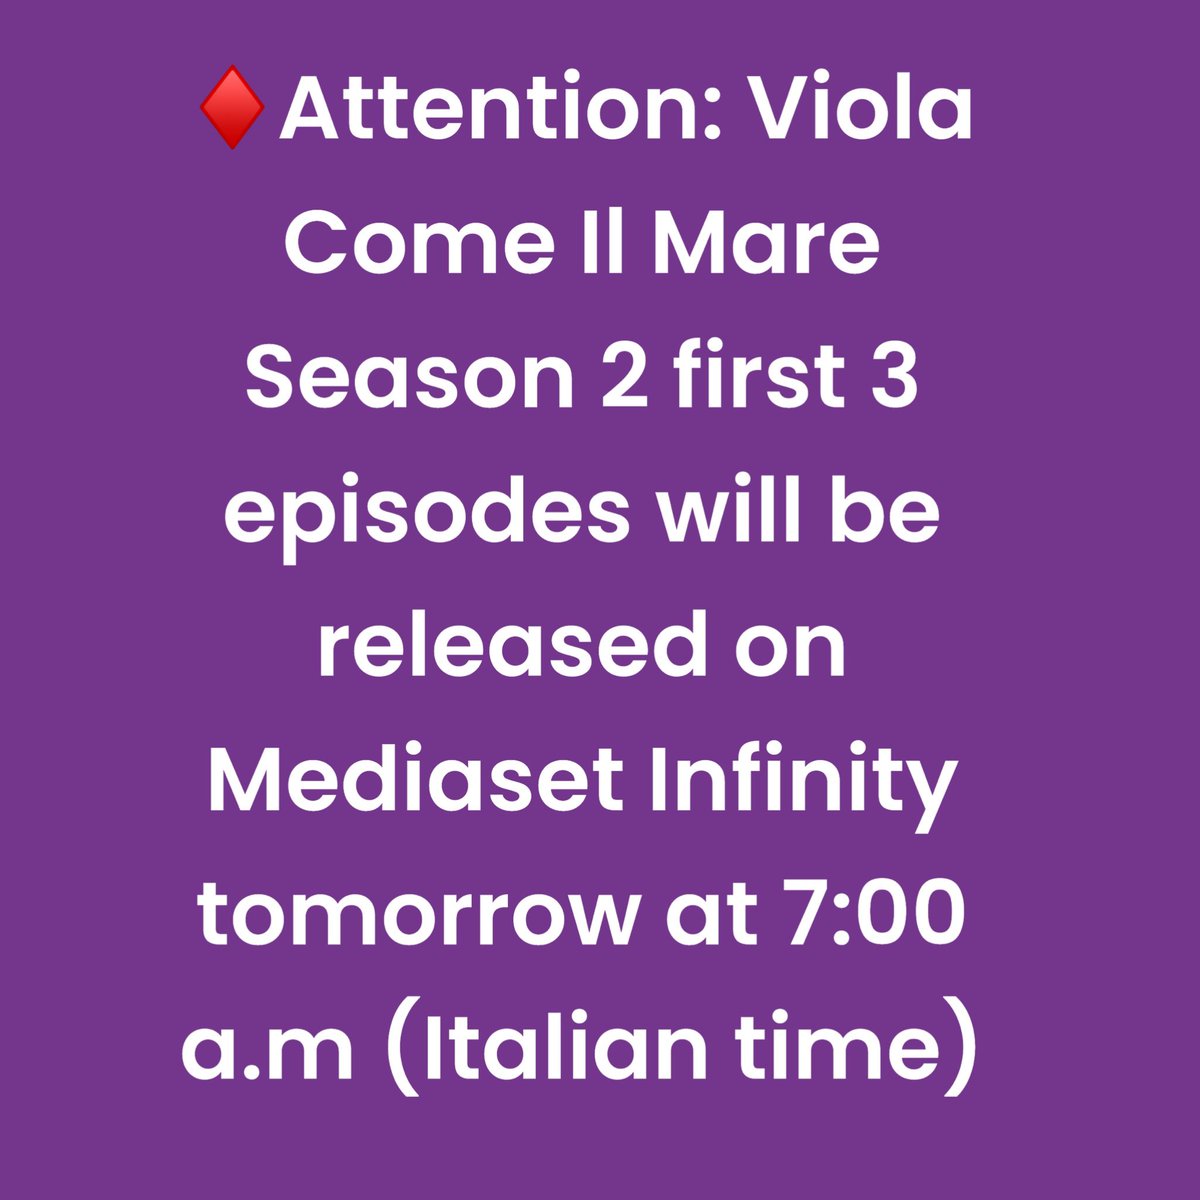 #ViolaComeIlMare2 - Mediaset Infinity First 3 episode release will be at 7:00 a.m Italian time